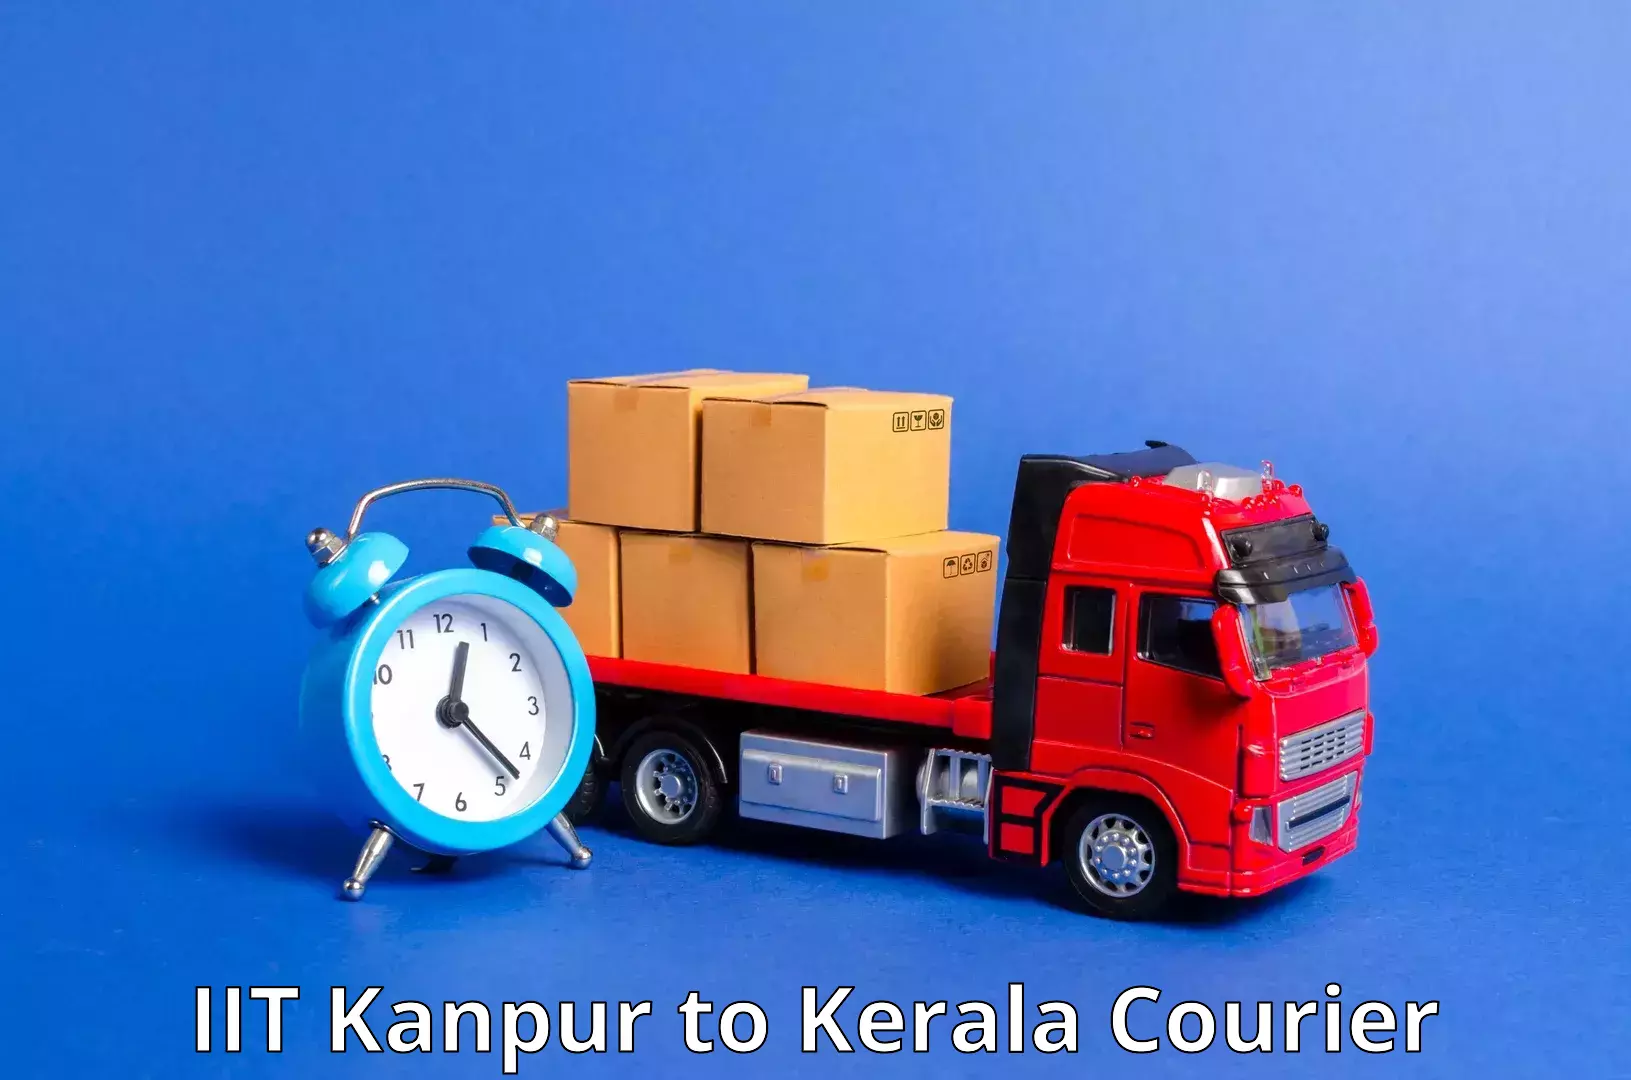 Package delivery network IIT Kanpur to Cochin Port Kochi